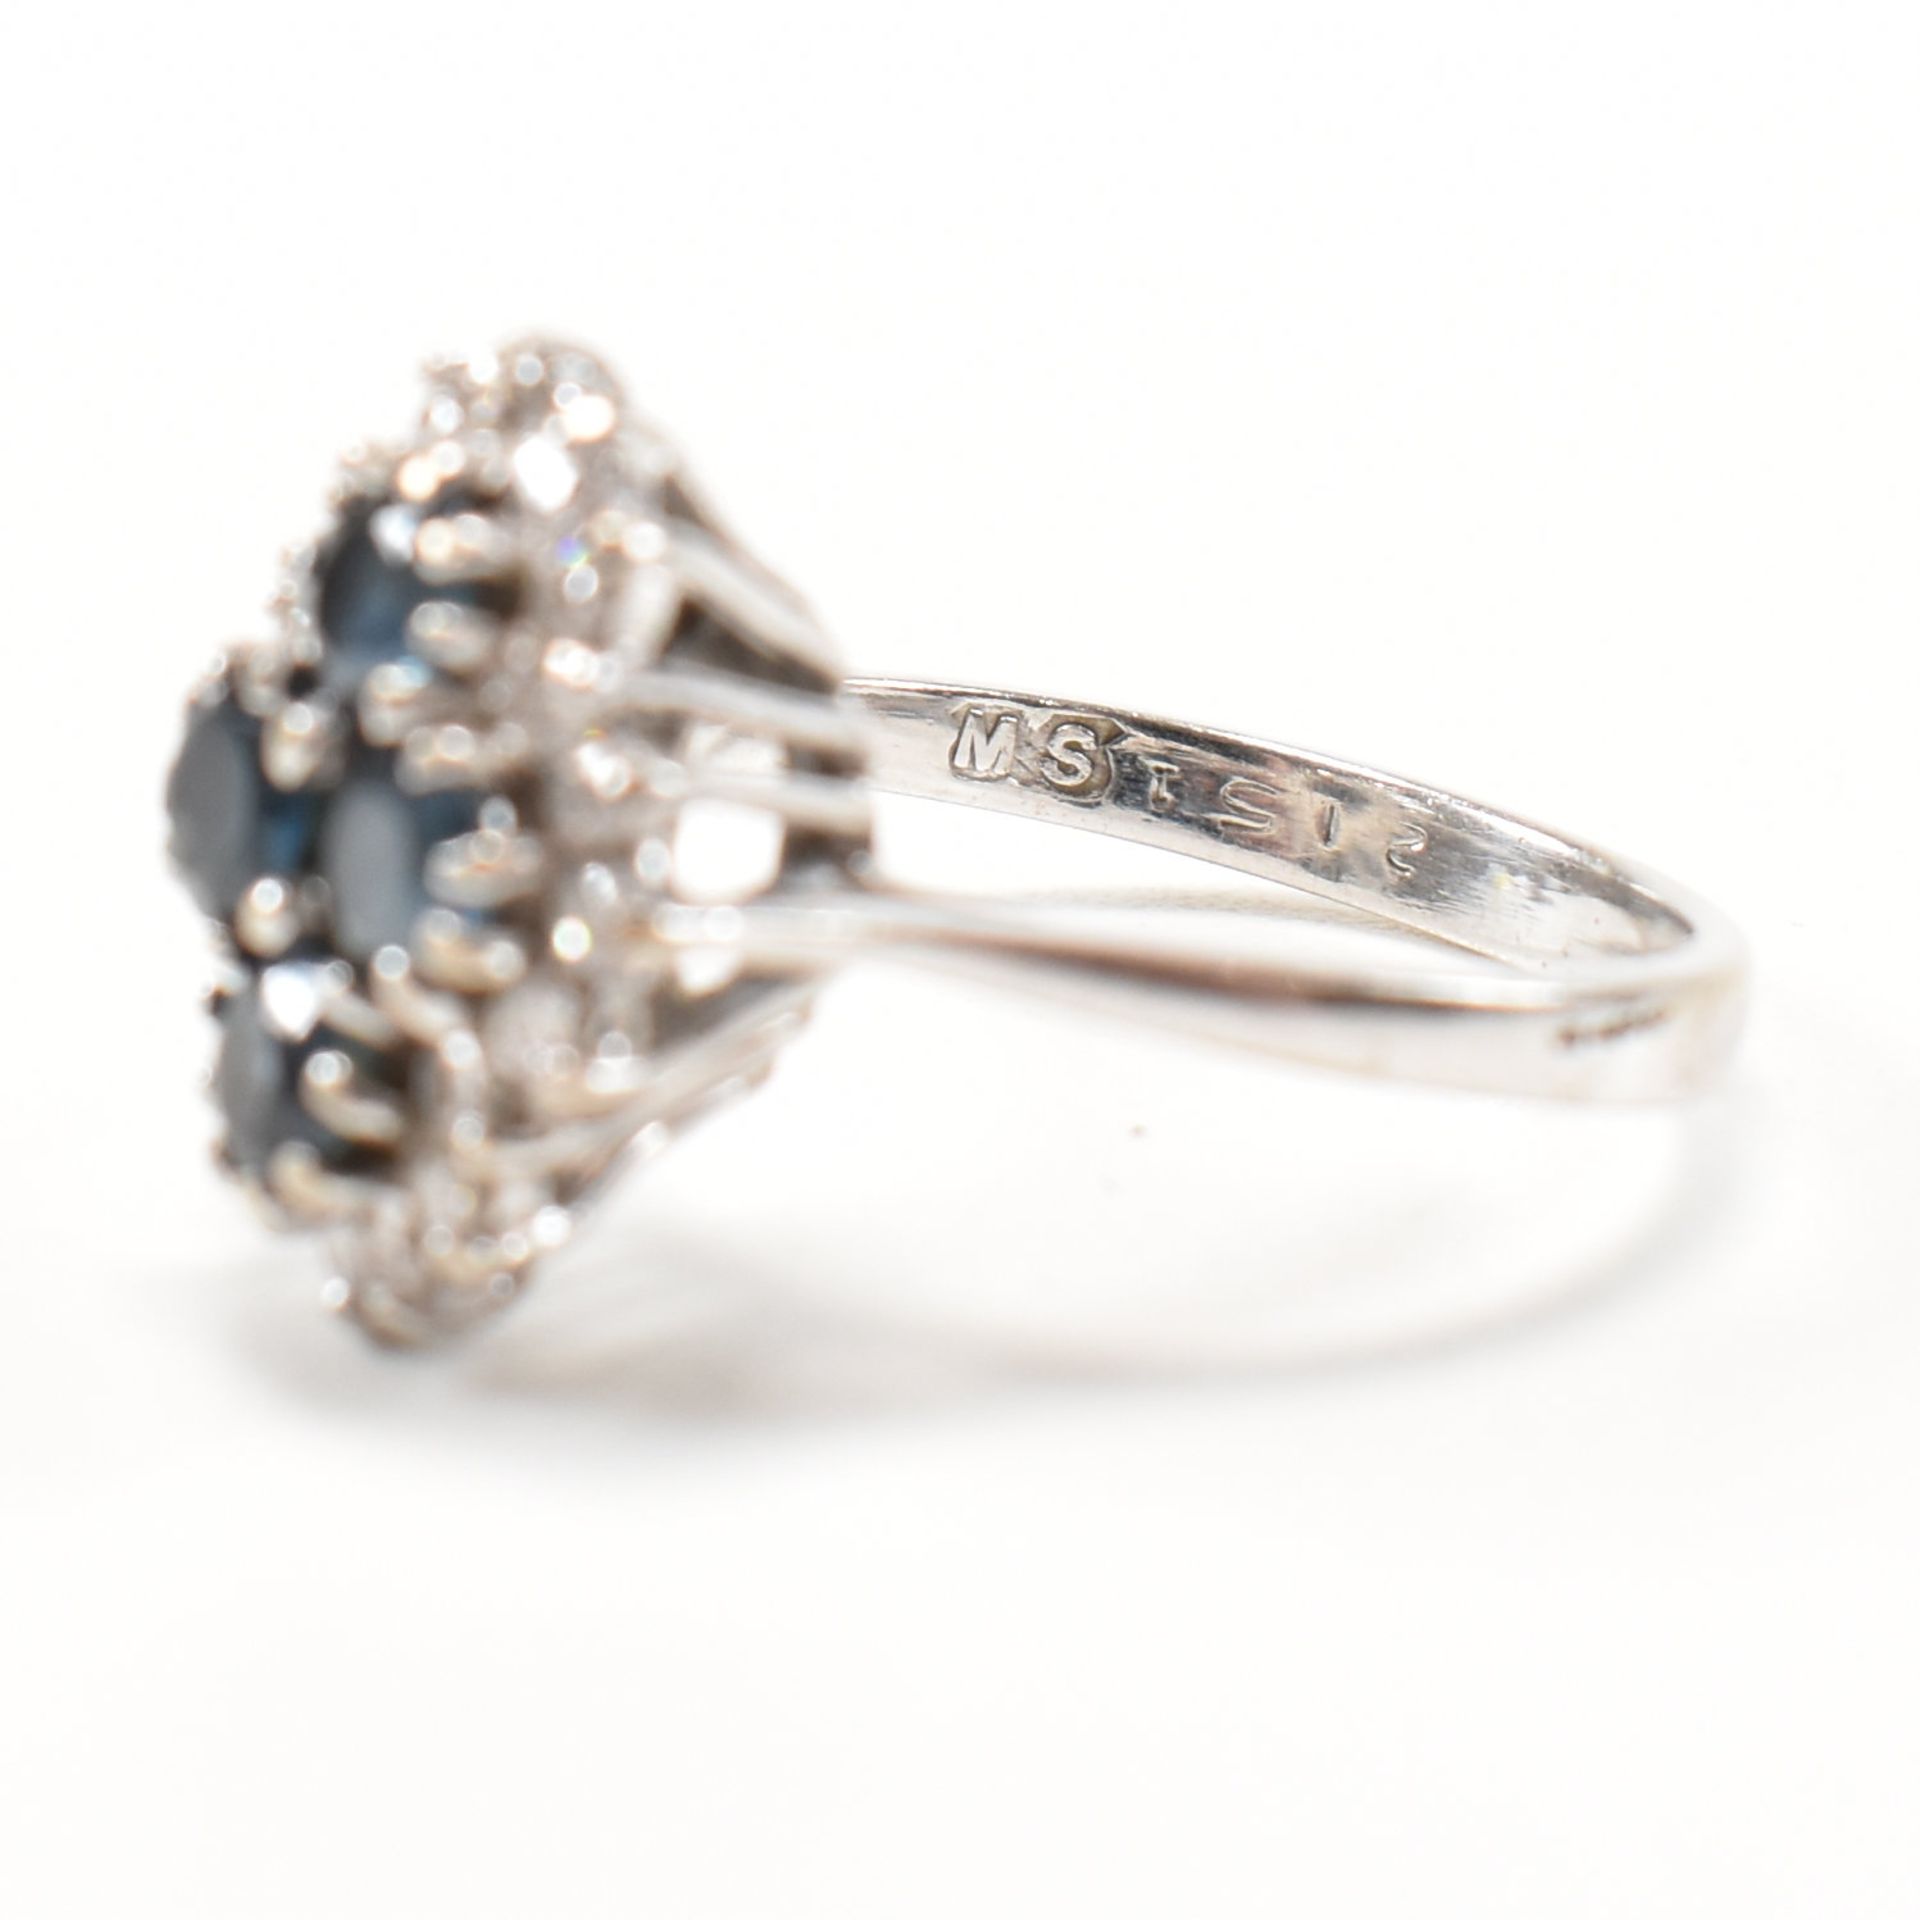 HALLMARKED 18CT WHITE GOLD SAPPHIRE & DIAMOND CLUSTER RING - Image 5 of 7